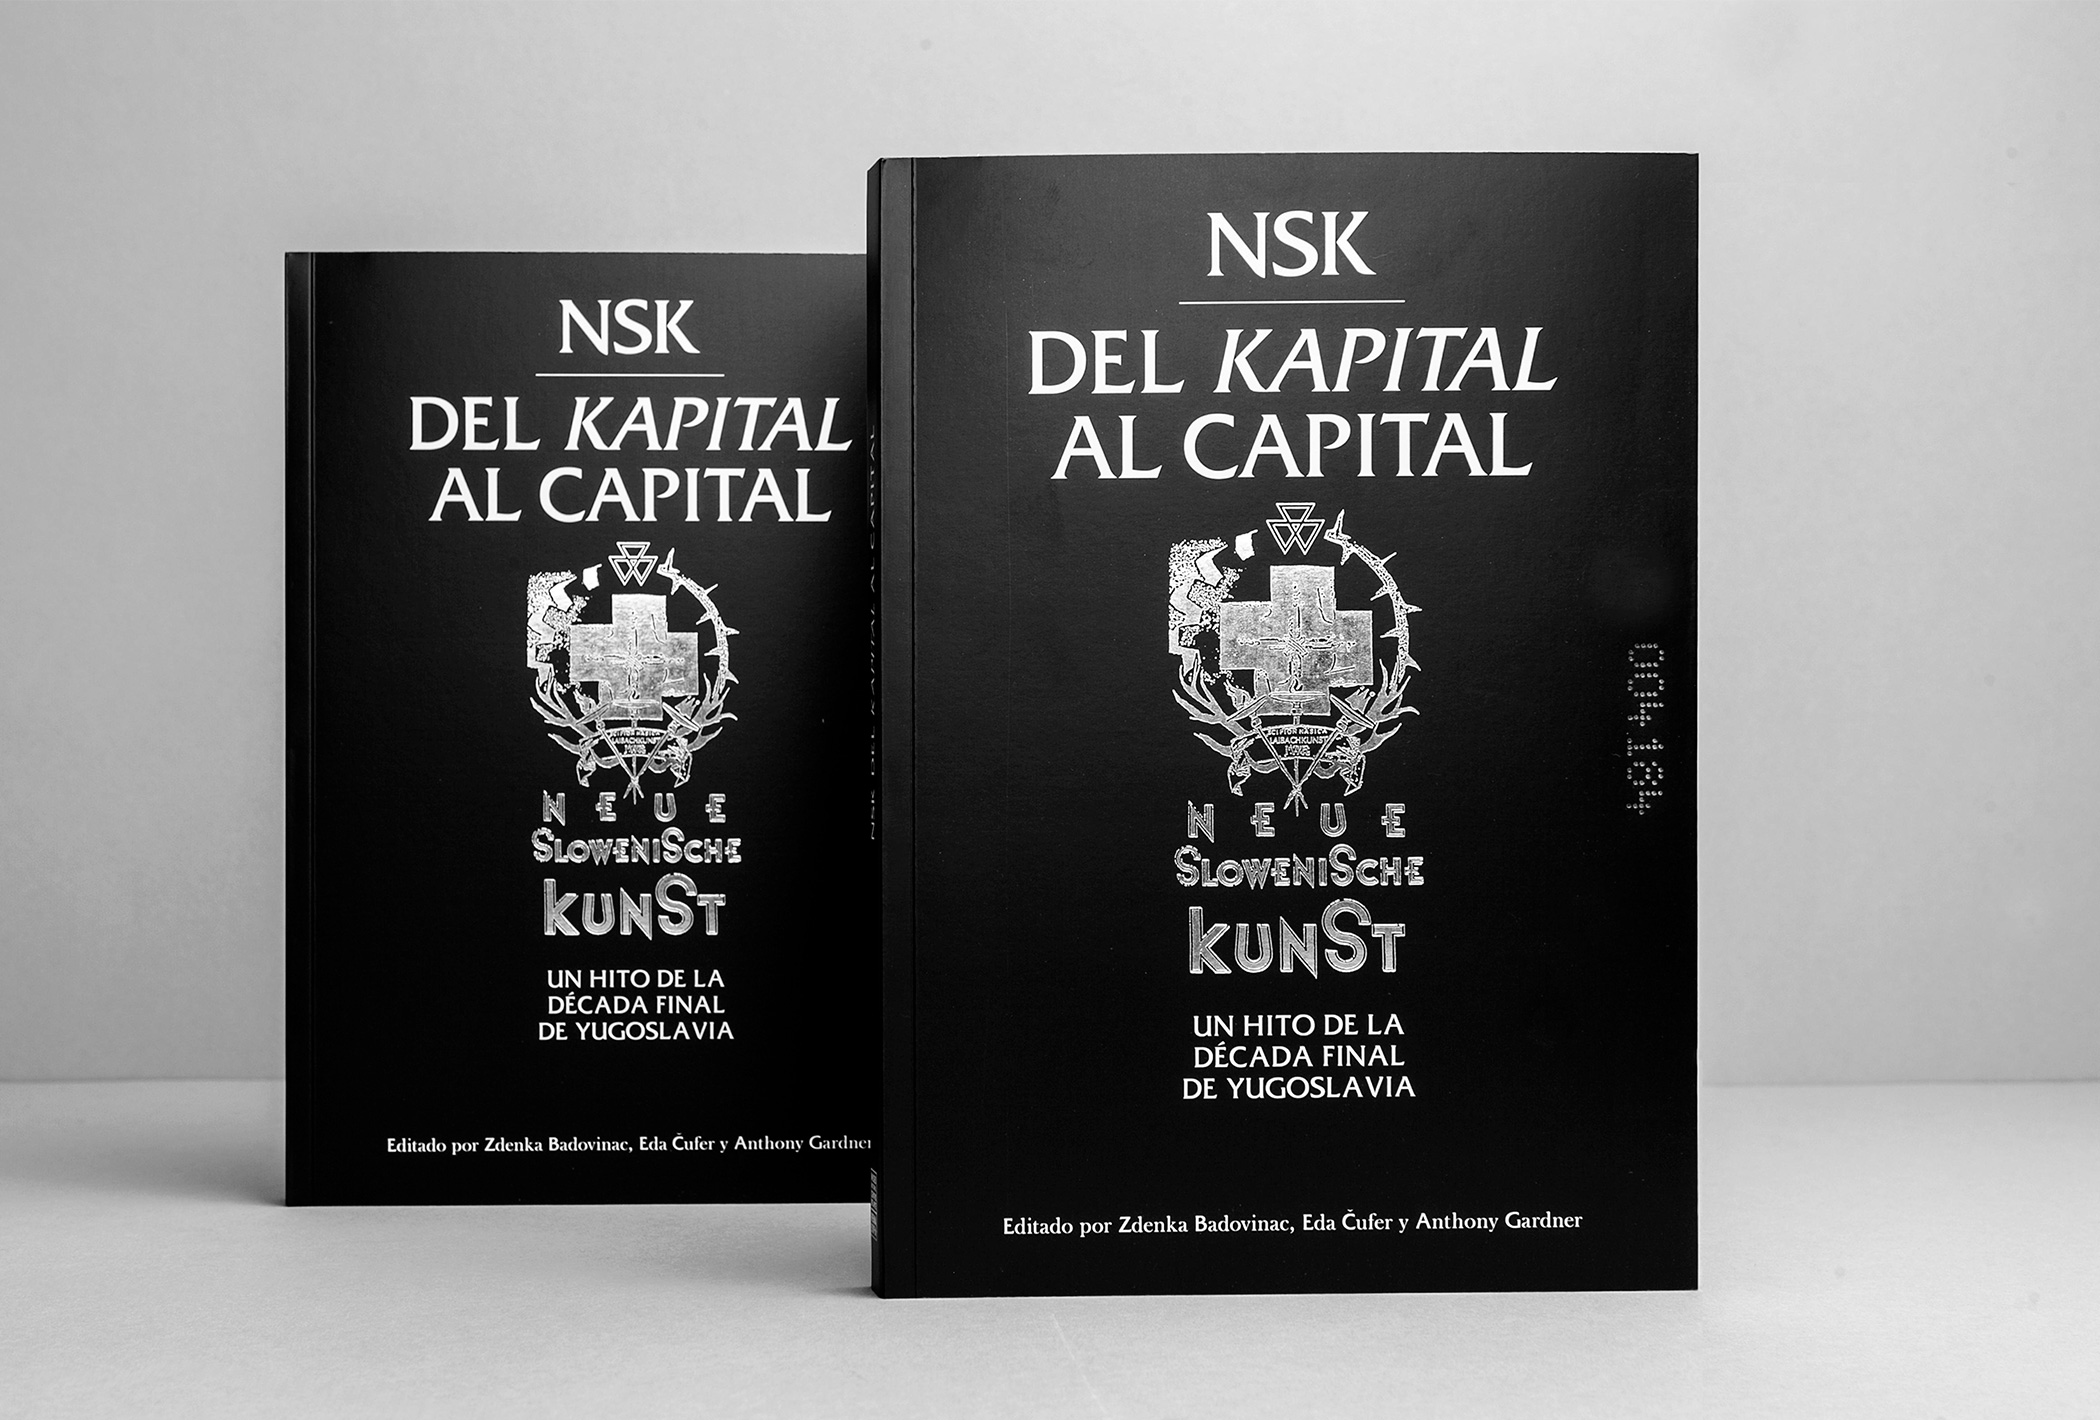 NSK from Kapital to Capital